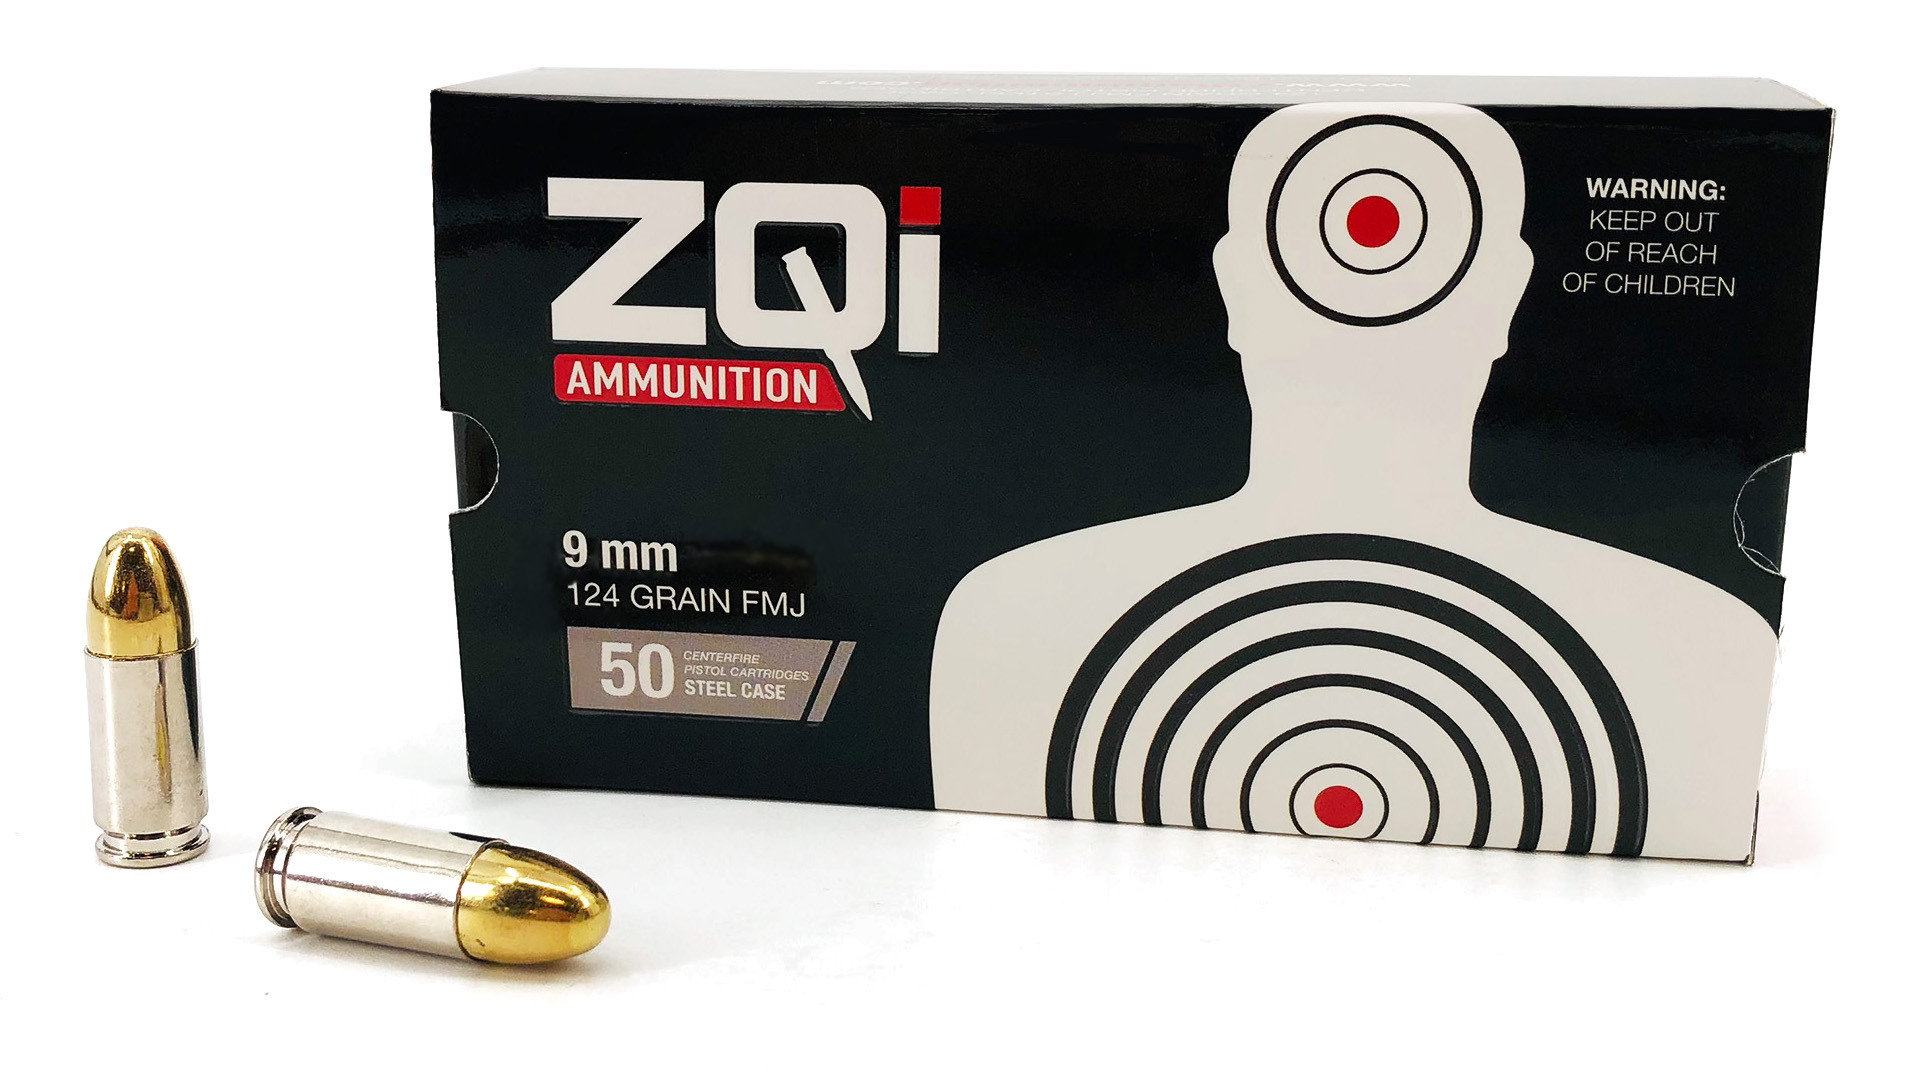 Our ZQi 9mm steel case ammunition offers a nickel-plated